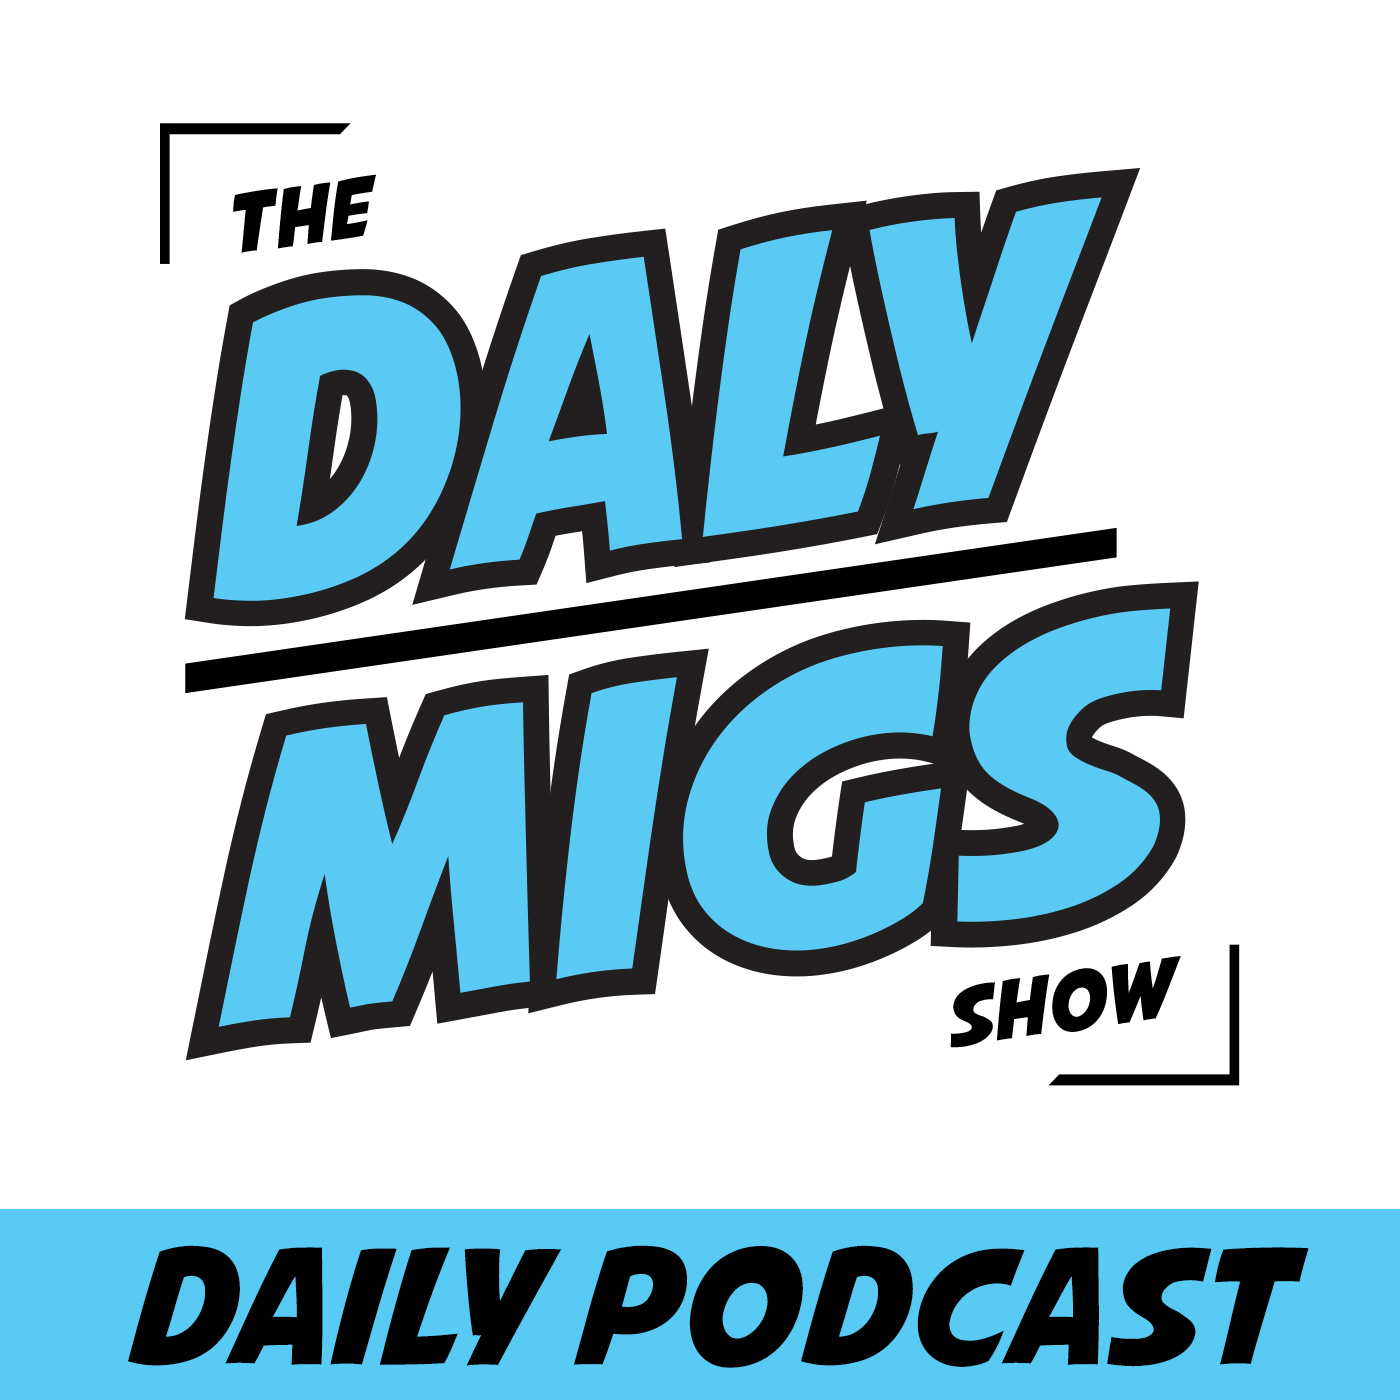 Daily Podcast pt. 3 - "What meltdown have you seen on stage?"